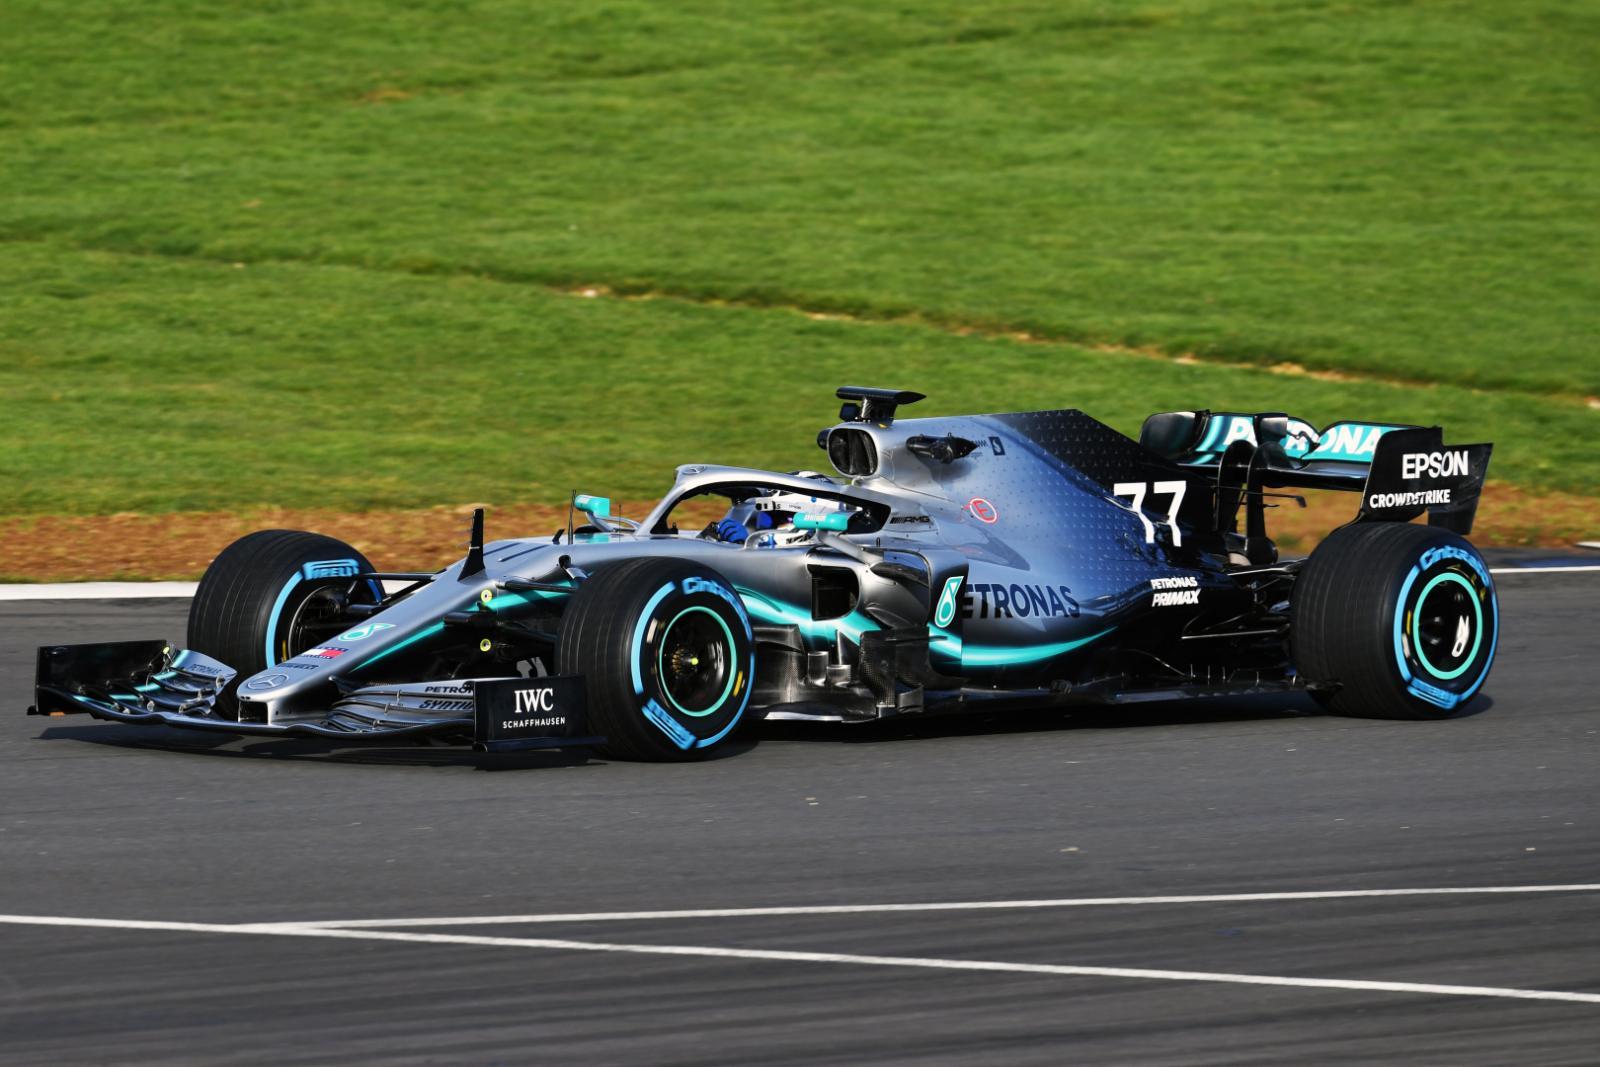 Mercedes Unveils 2019 F1 Car W10 (Featuring On Track Image)